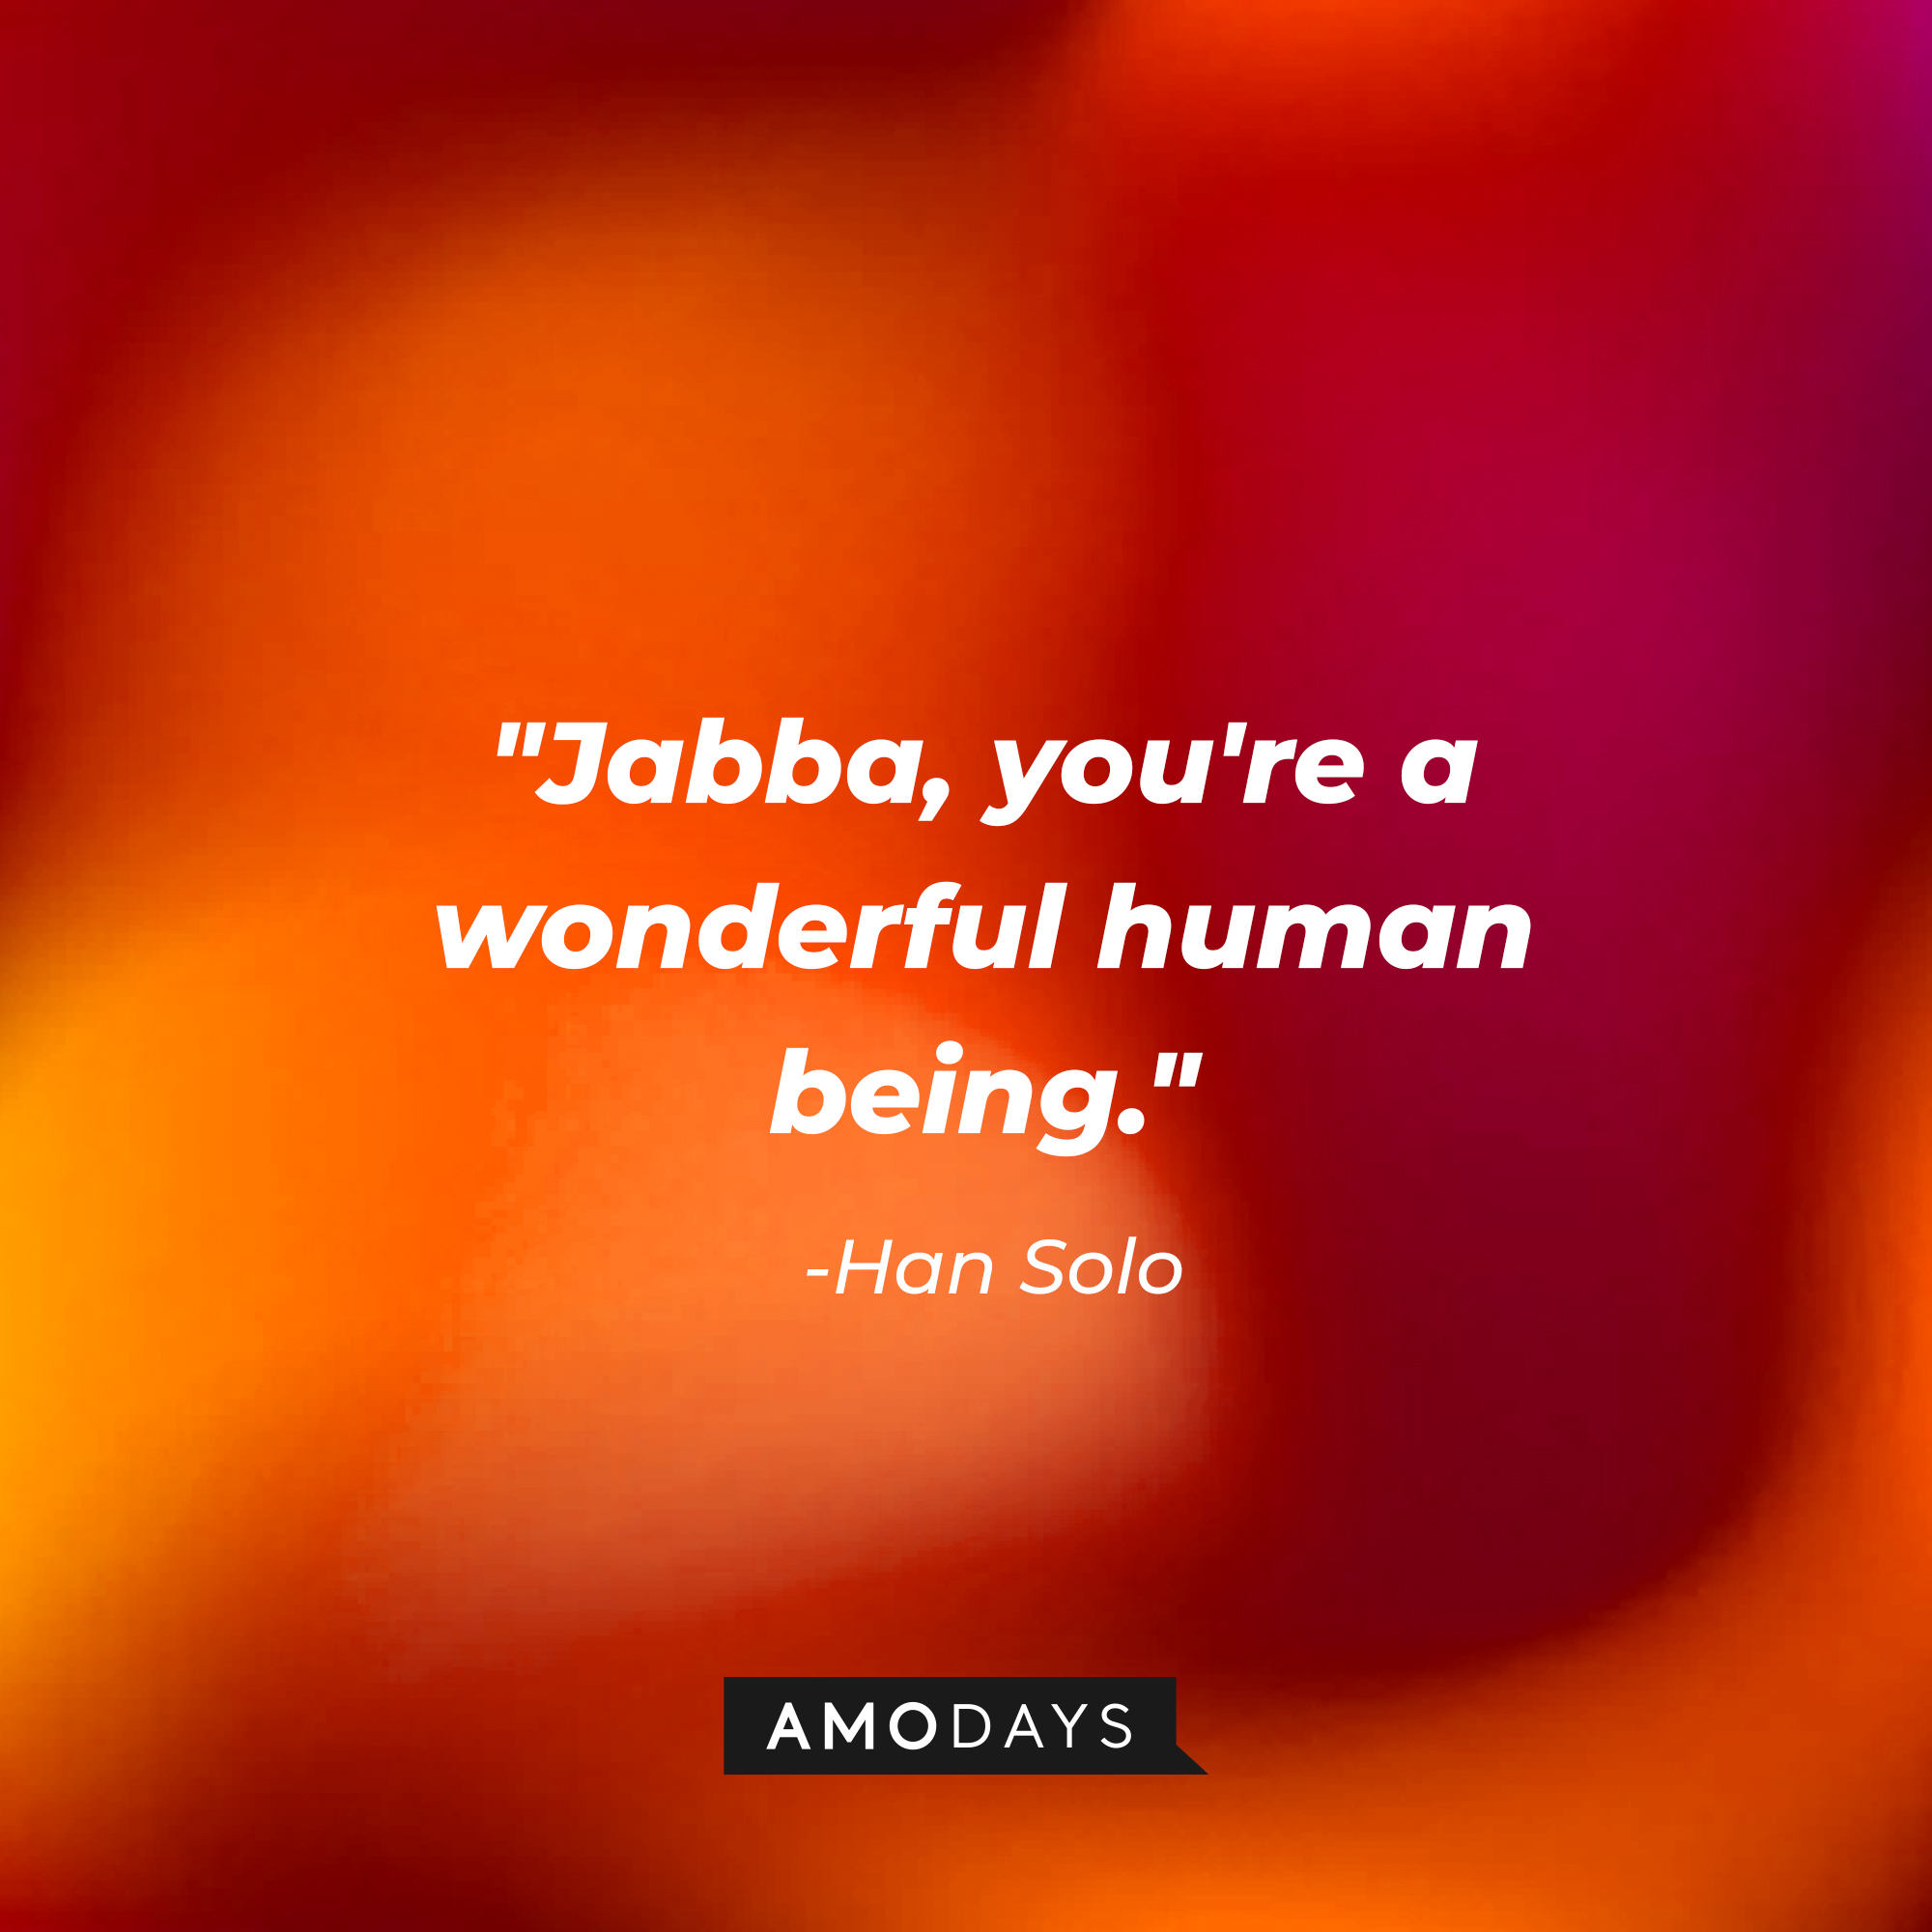 Han Solo’s quote: "Jabba, you're a wonderful human being." | Source: AmoDays